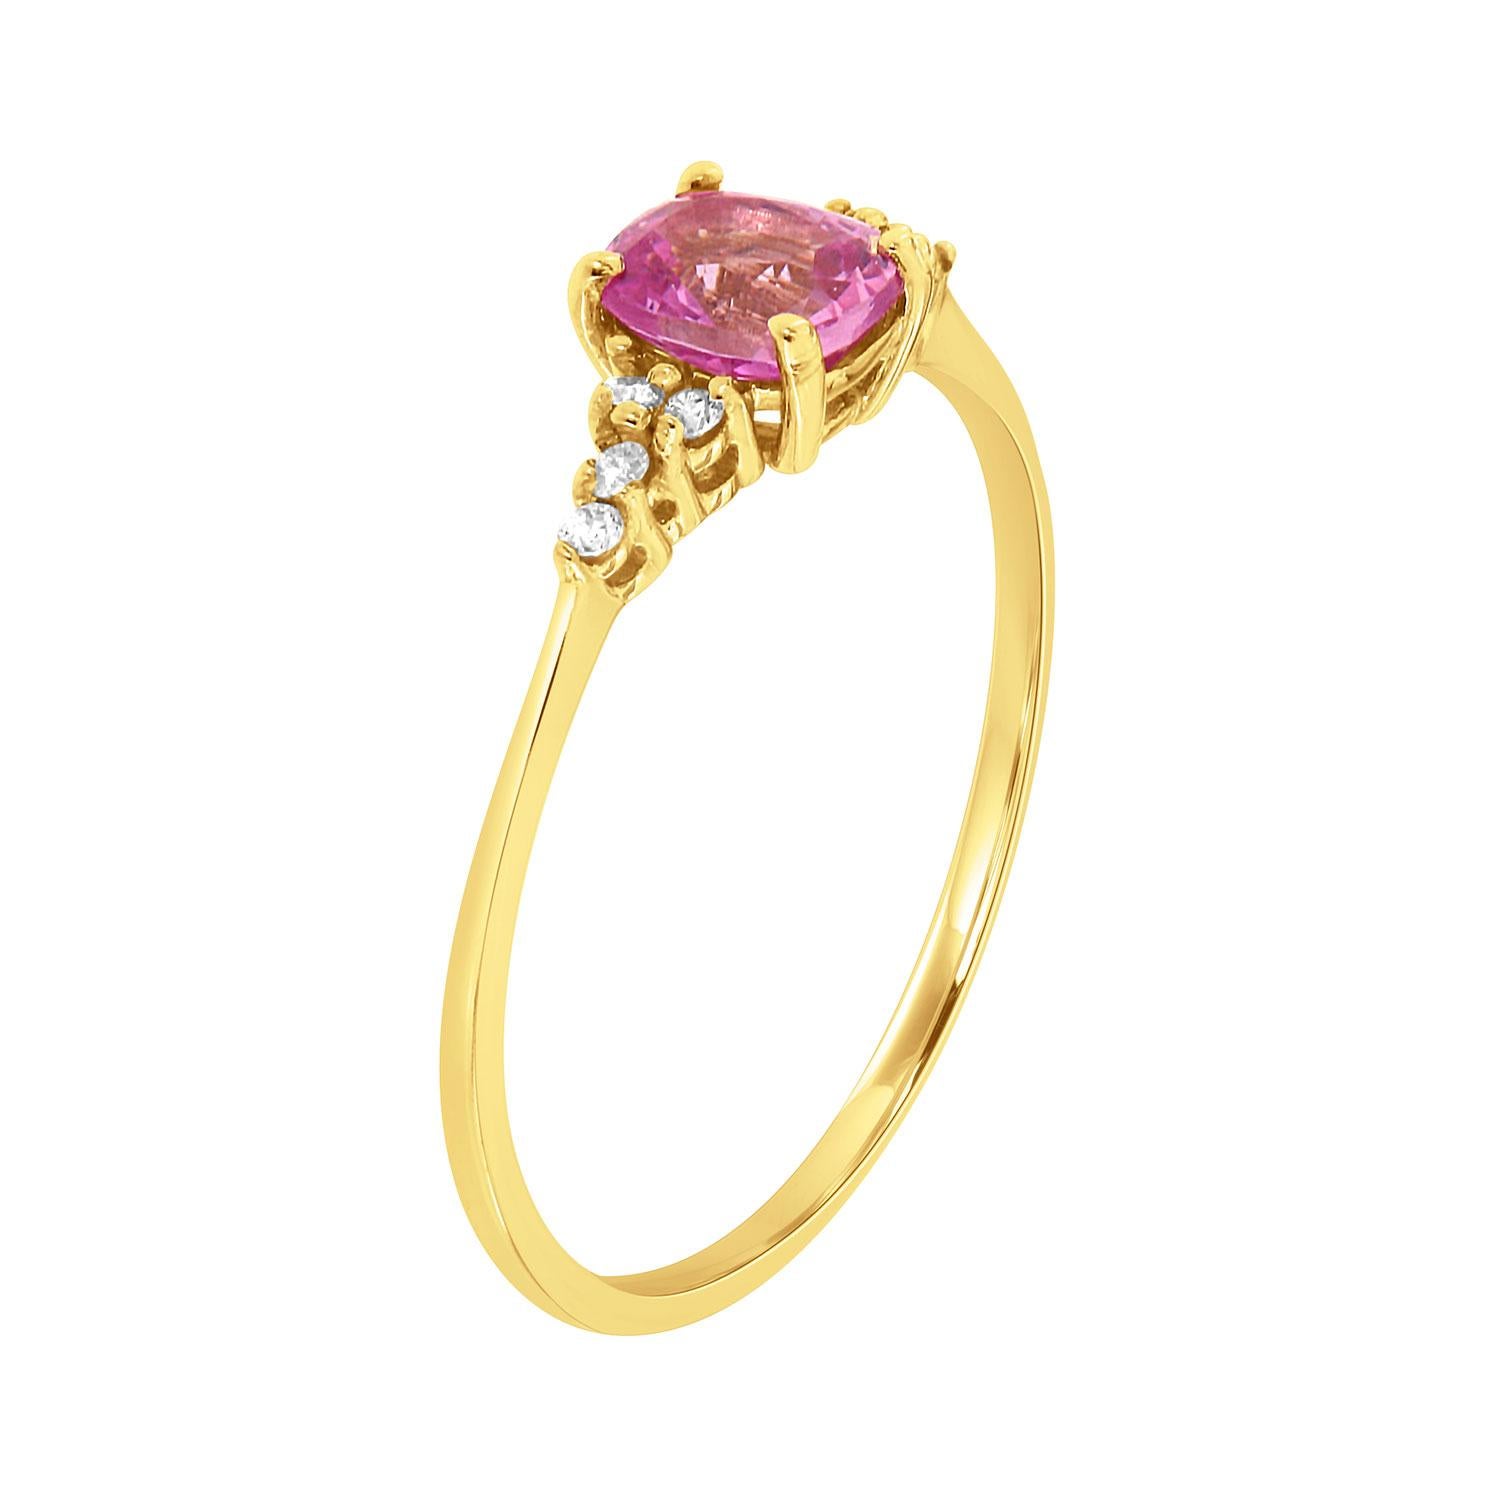 This ring features a 0.61 - carat Elongated cushion Sri-Lankan Sapphire flanked by eight (8) Brilliant round diamonds on a delicate 1.2 mm wide band.  
The Sapphire exhibits the most desirable vibrant hot pink color in an excellent luster.
The ring